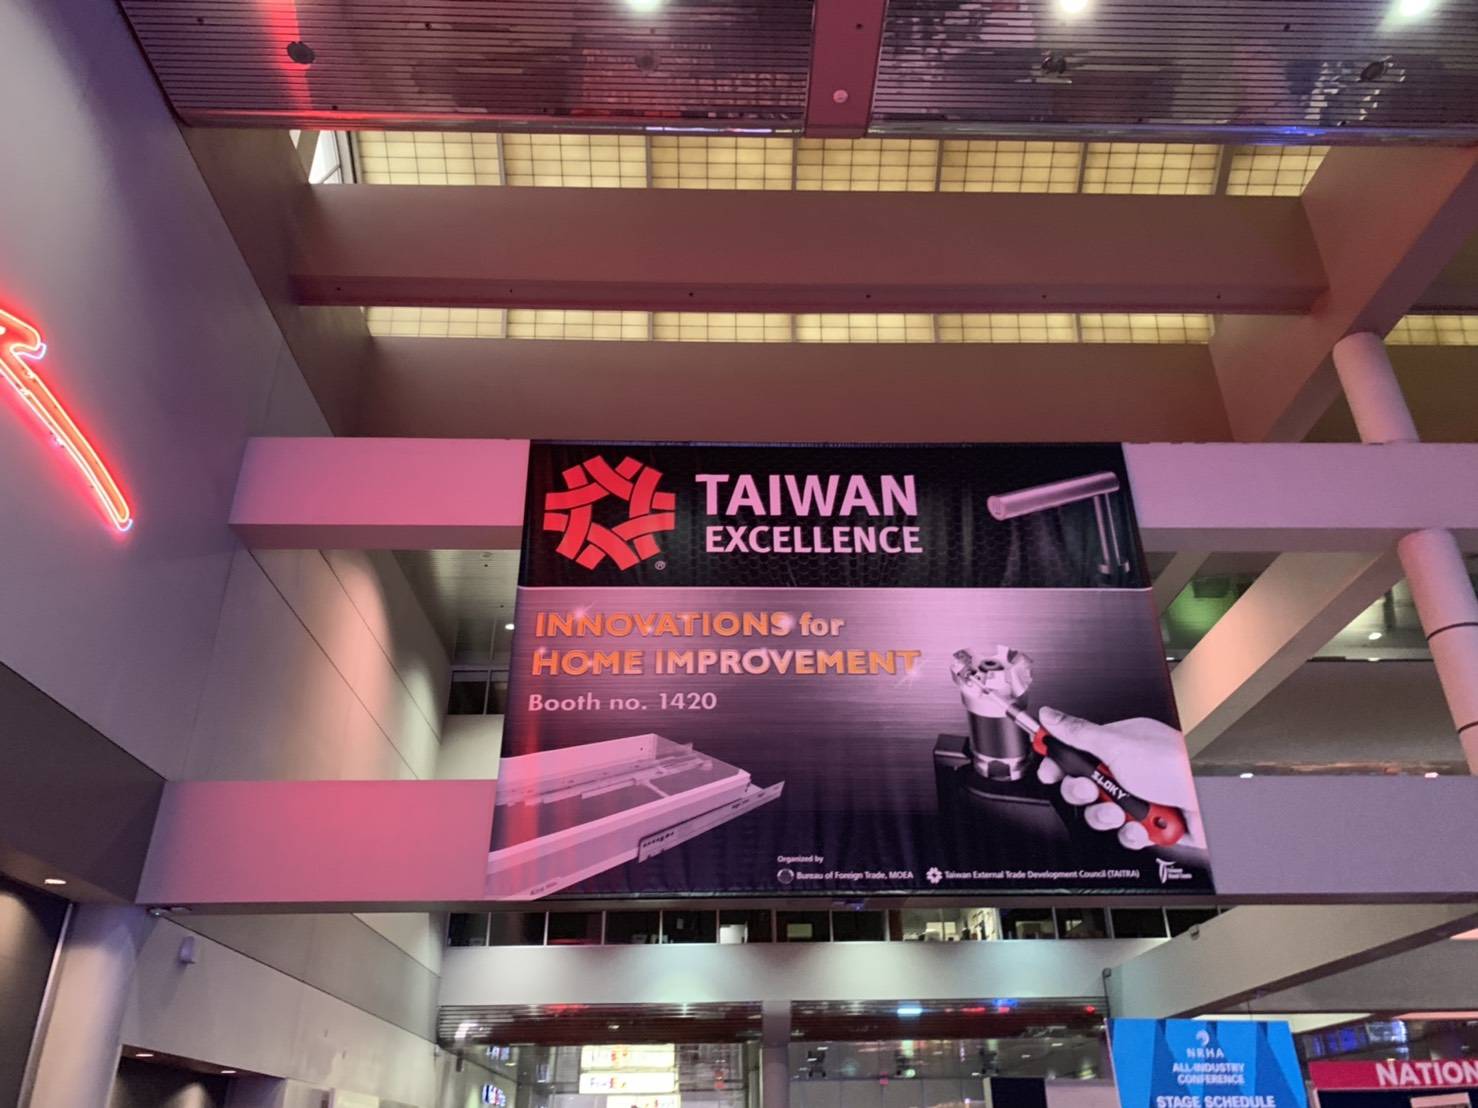 Sloky in NHS 2019 by Taiwan Excellence, booth 1420
We are very thankful and honored to be displayed by Taiwan Excellence.